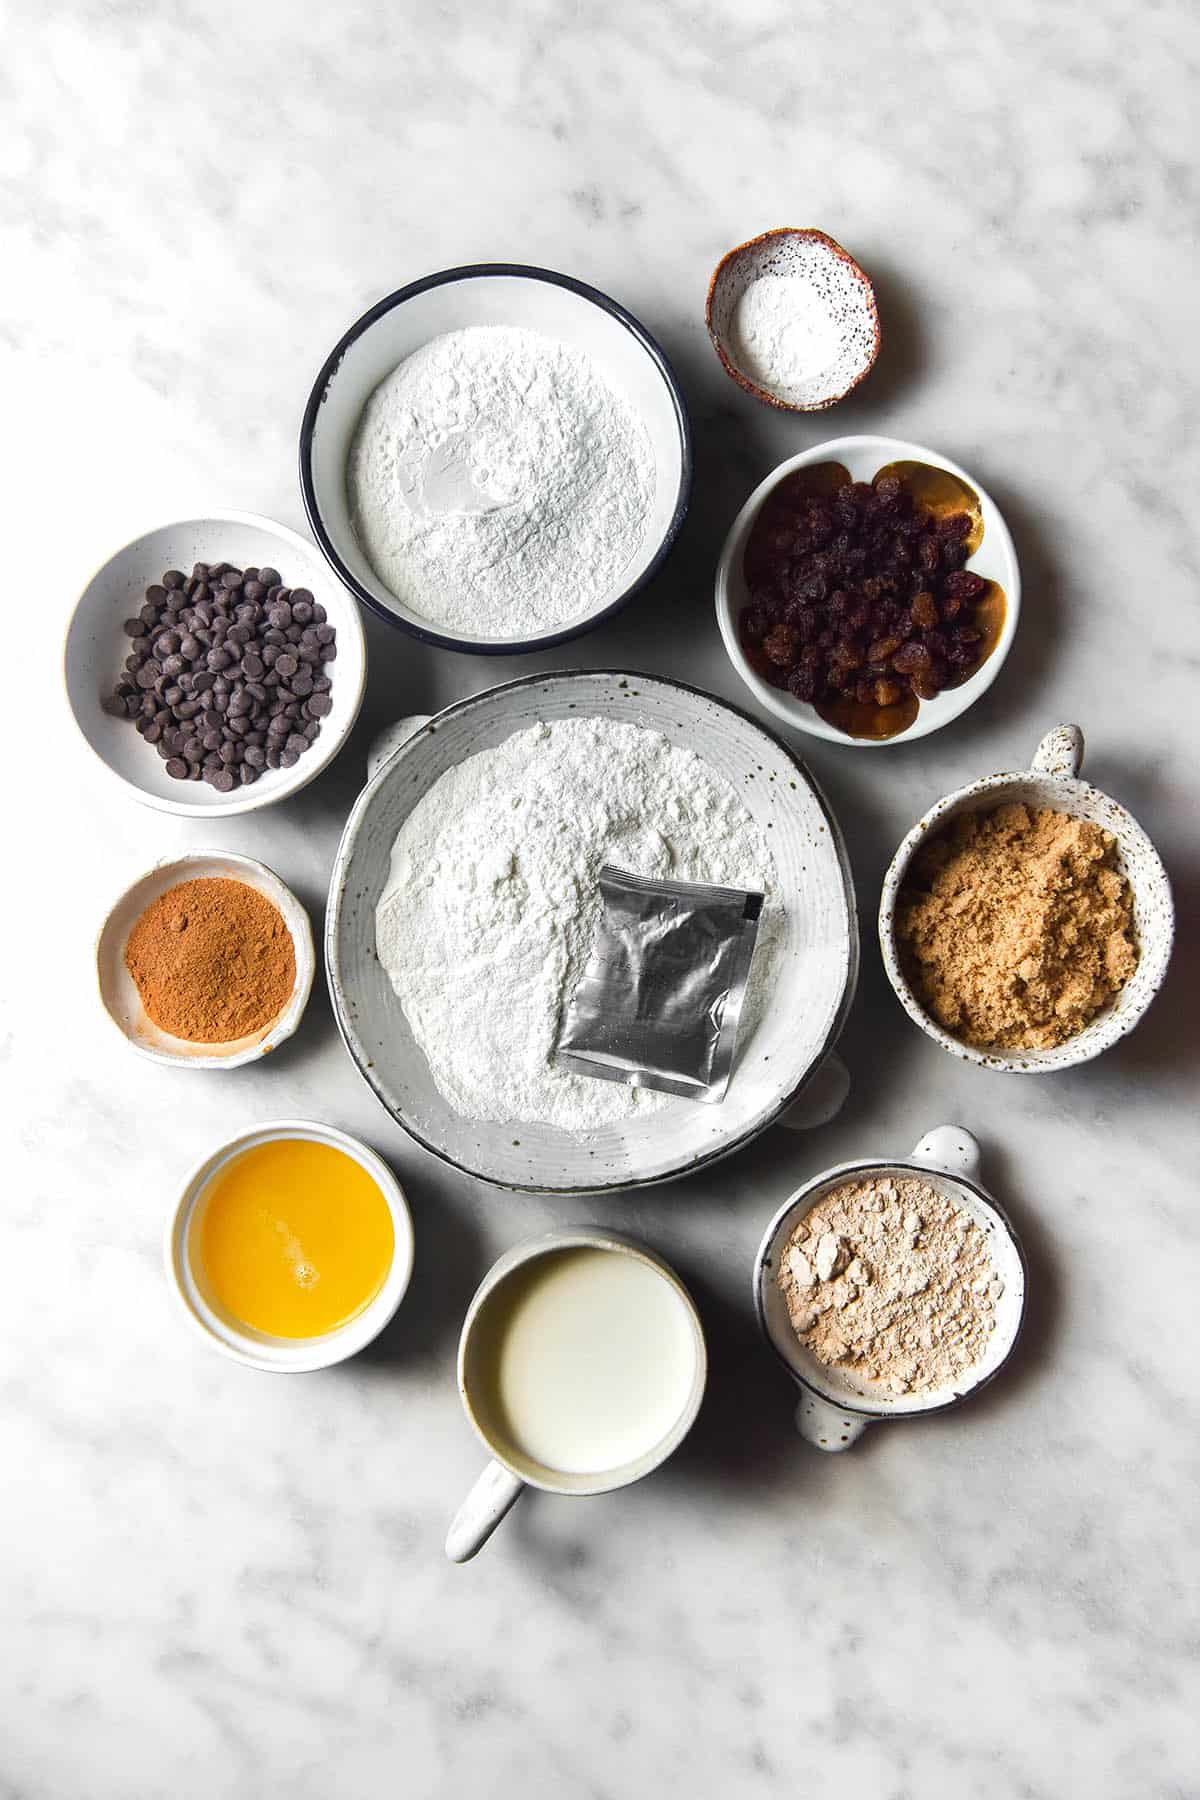 An aerial image of the ingredients used to make a gluten free hot cross bun loaf. The ingredients are arranged in small white ceramic bowls on a brightly lit white marble table